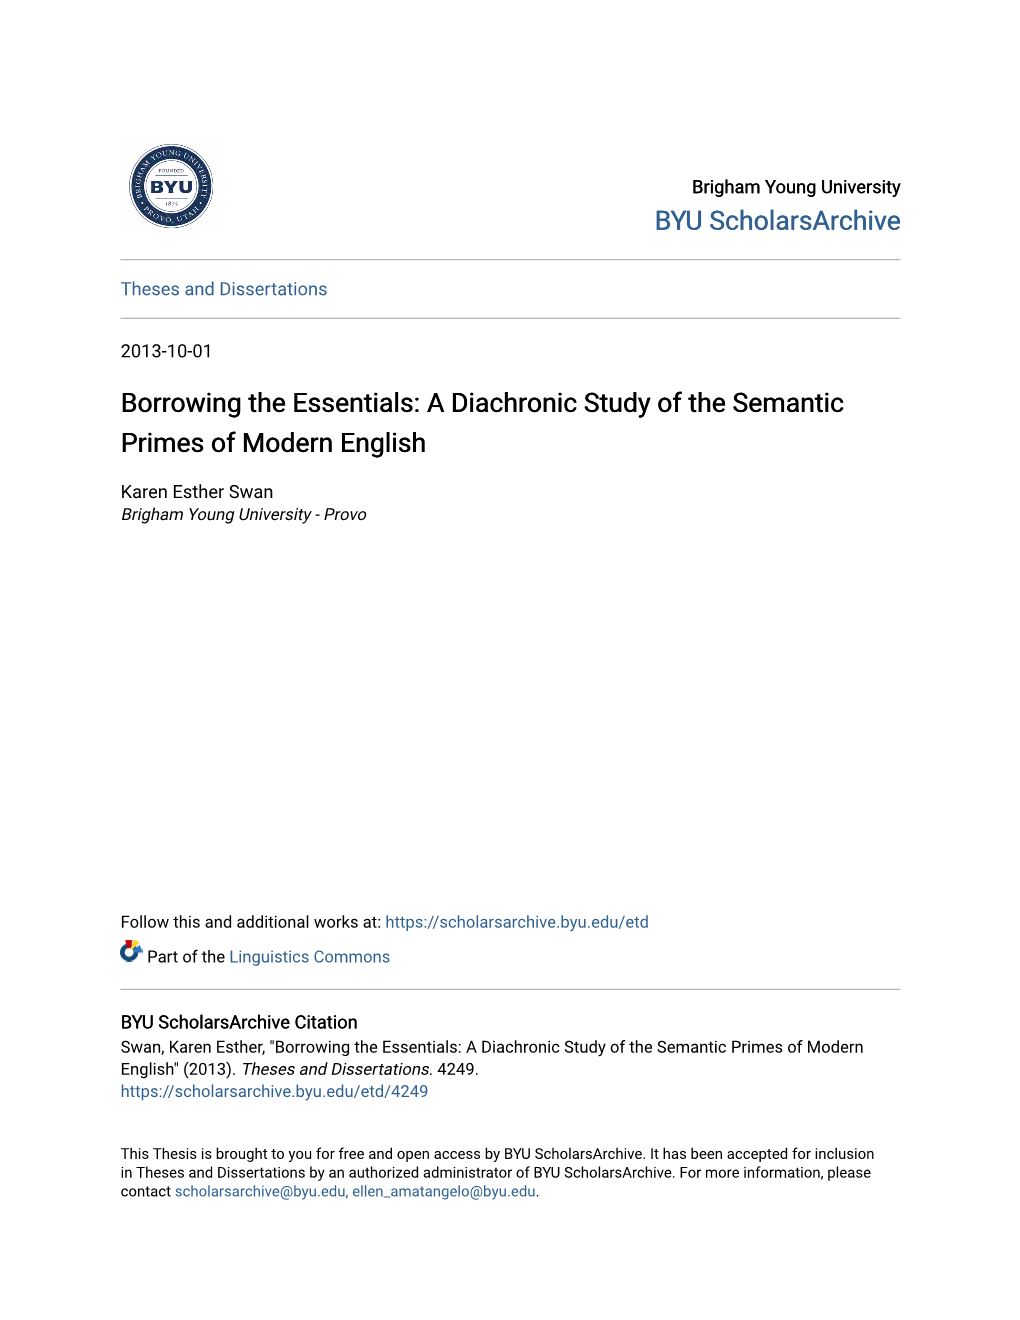 Borrowing the Essentials: a Diachronic Study of the Semantic Primes of Modern English